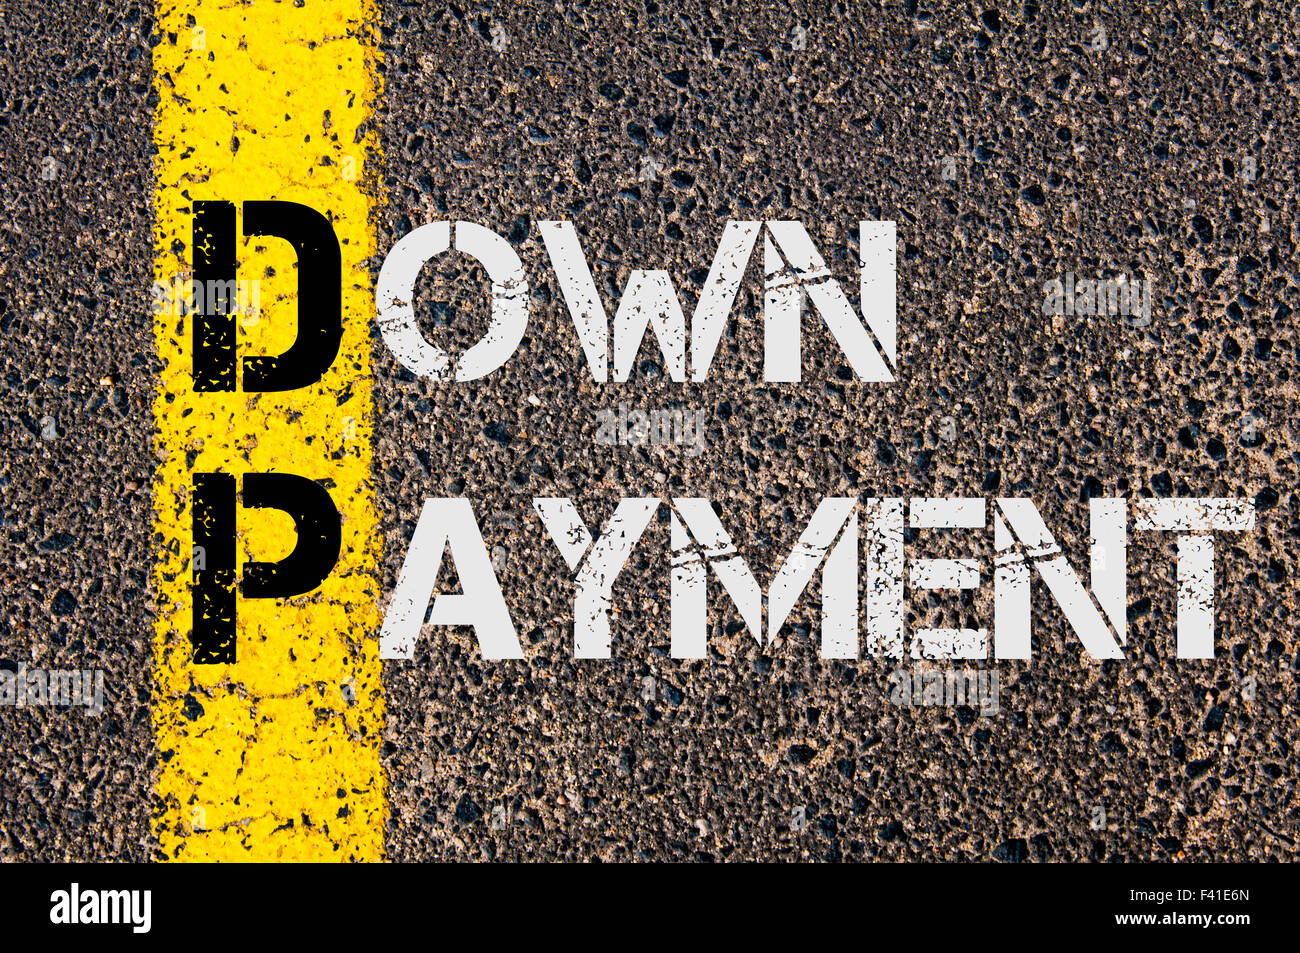 Concept image of Business Acronym DP as DOWN PAYMENT written over road marking yellow paint line. Stock Photo